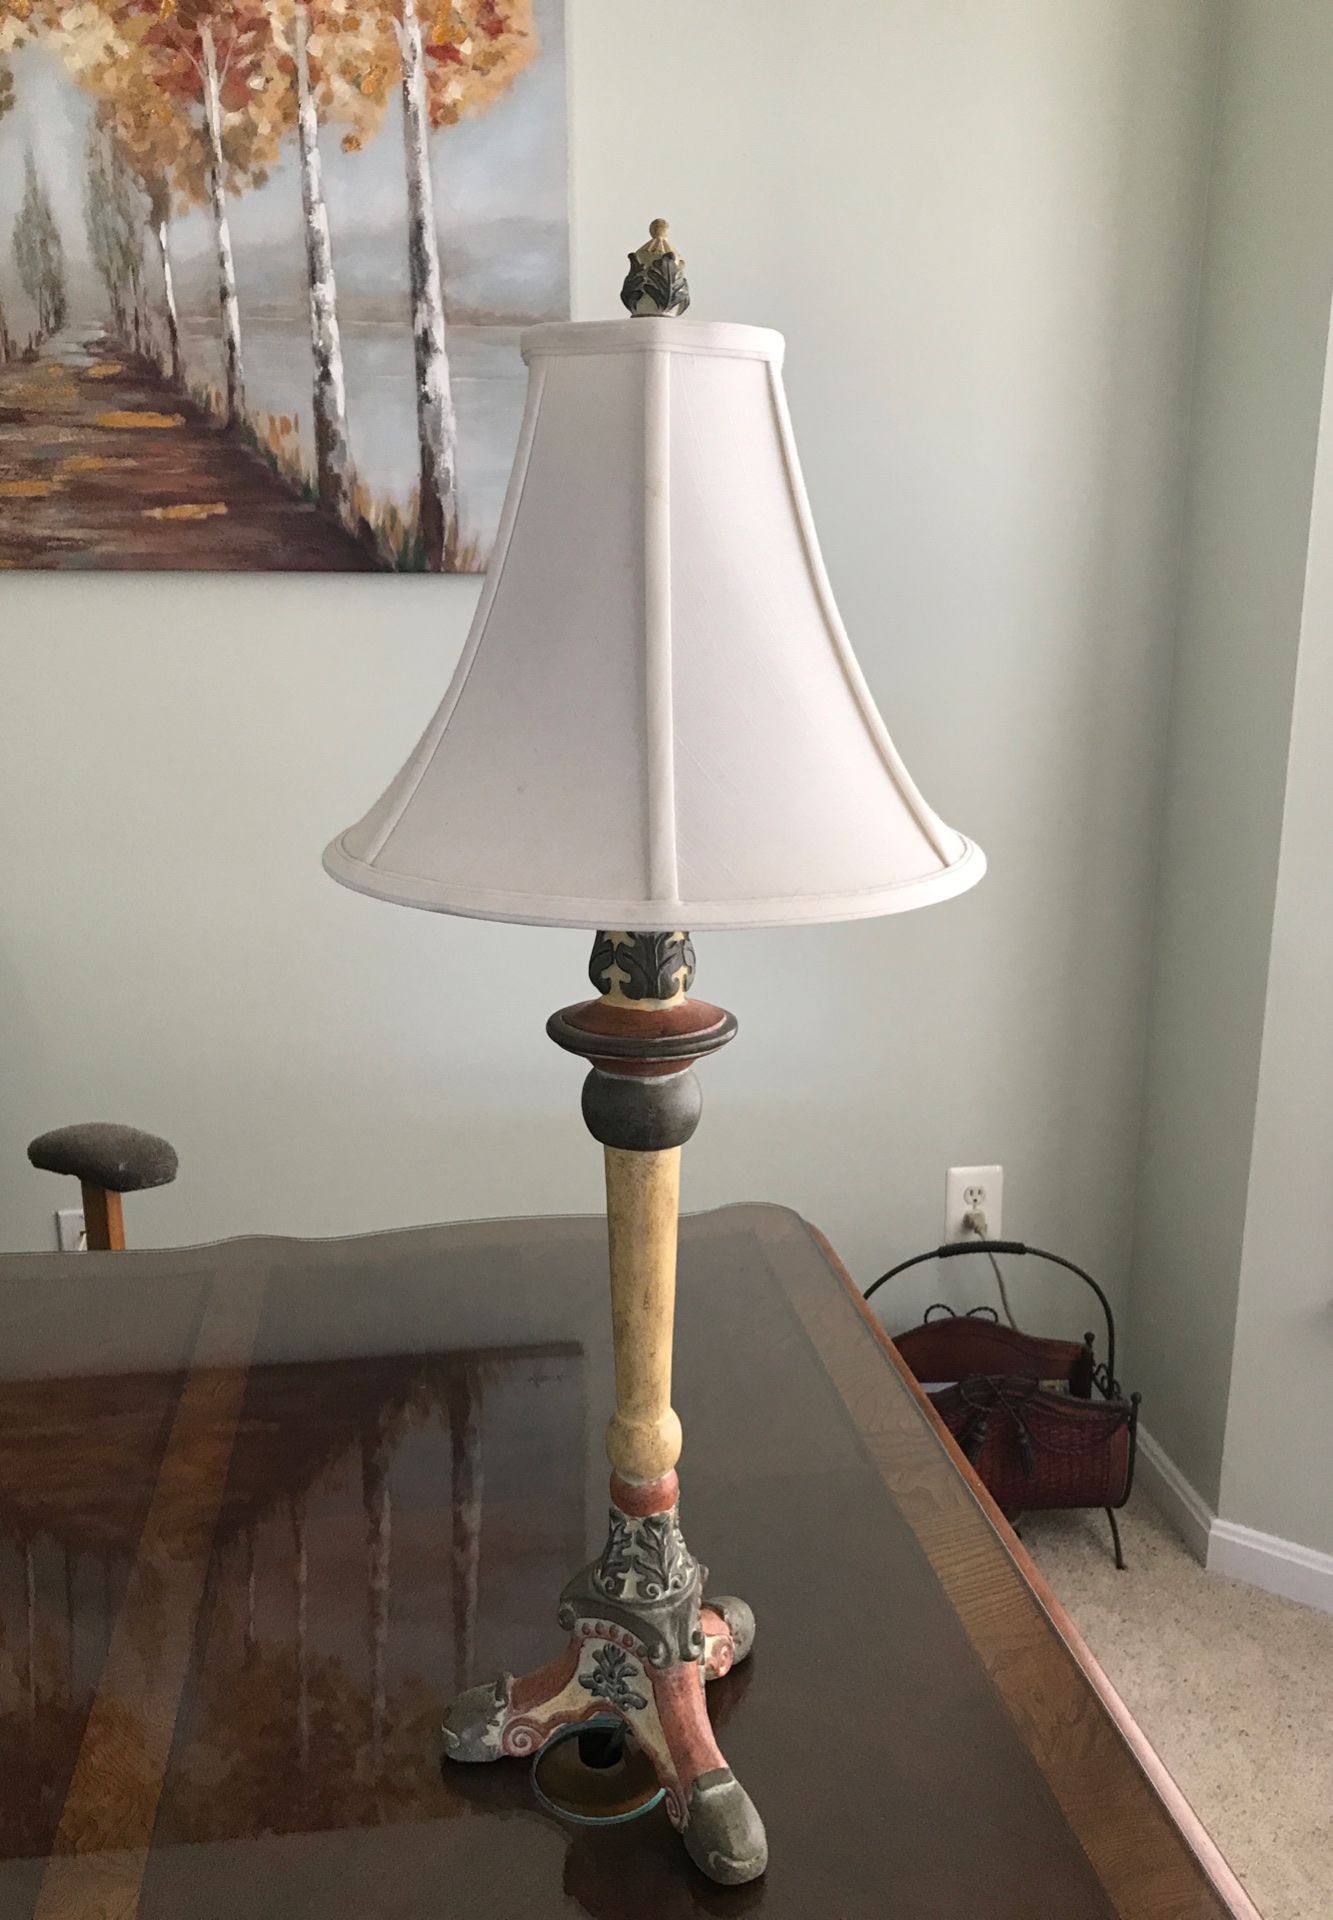 Pair of identical table lamps